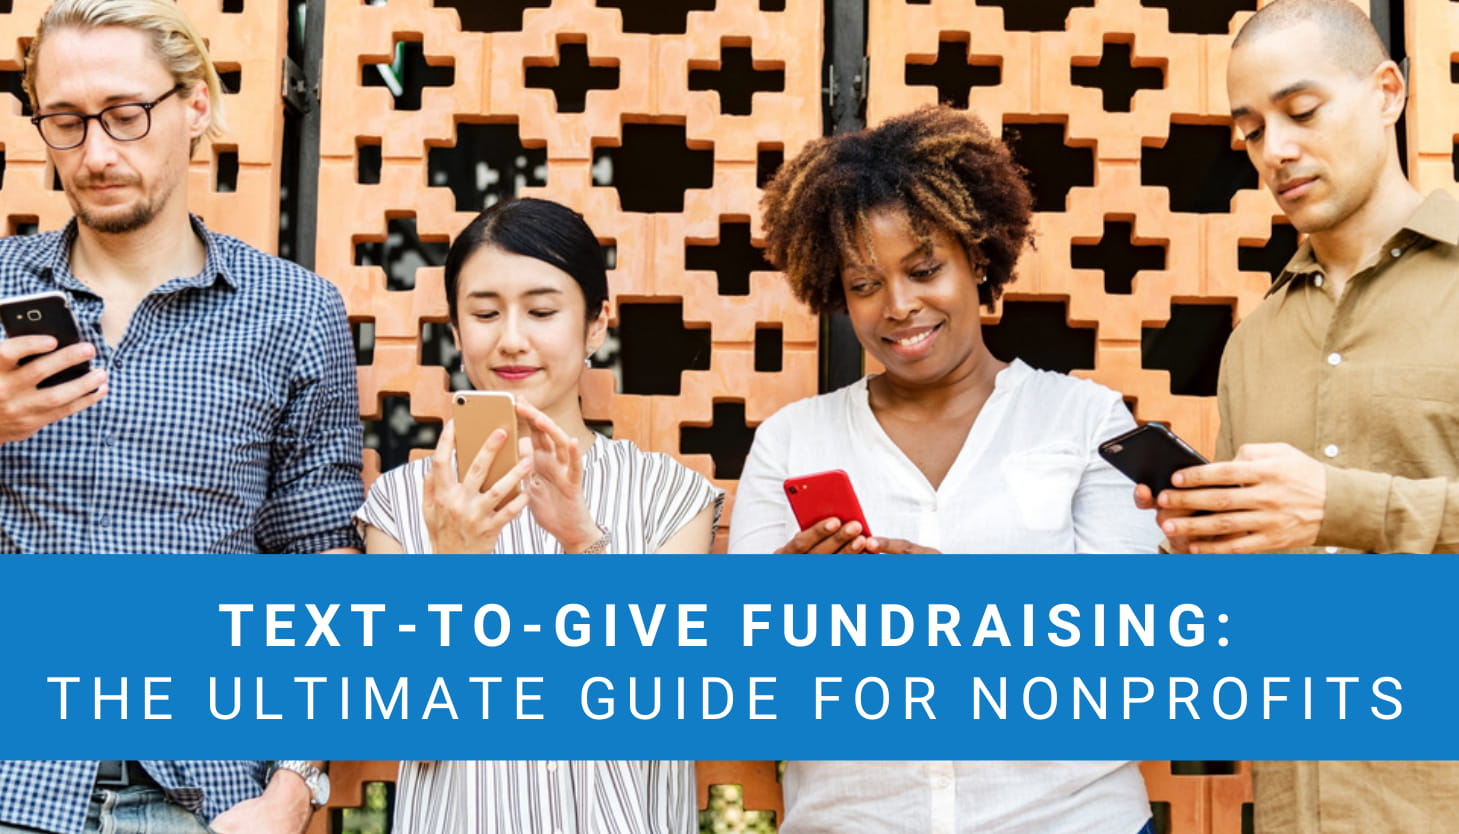 Text-to-Give Fundraising: The Ultimate Guide for Nonprofits